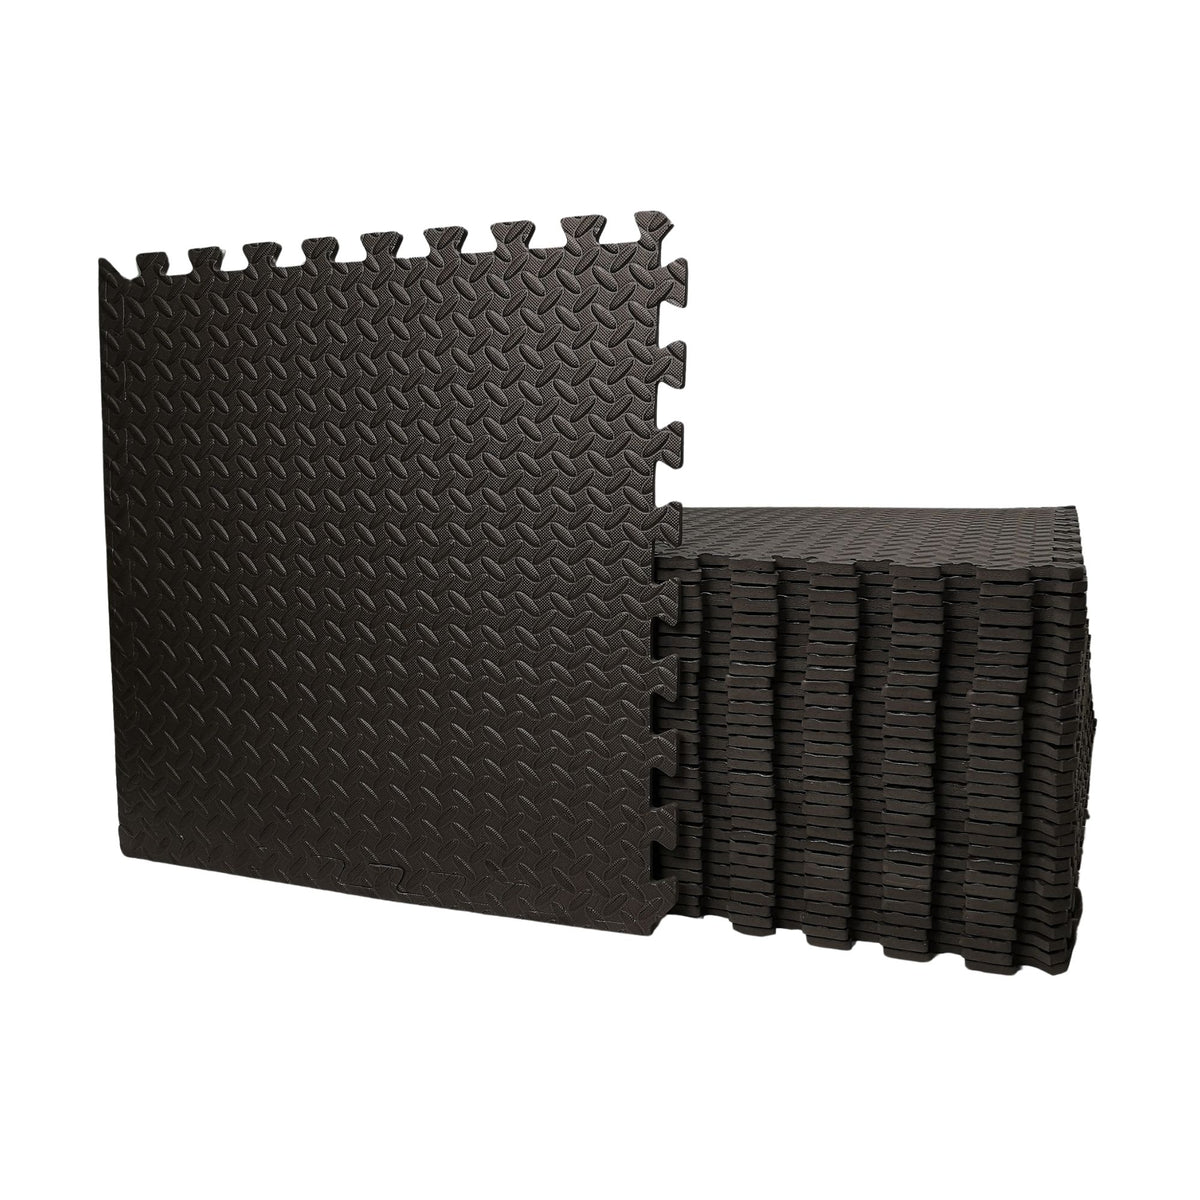 Samuel ALEXANDER 32 Piece EVA Foam Floor Protective Floor Tiles/Mats 60x60cm Each For Gyms, Garages, Camping, Kids Play Matting, Hot Tub Flooring Mats And Much More! Covers 11.52 sqm (124 sq ft)